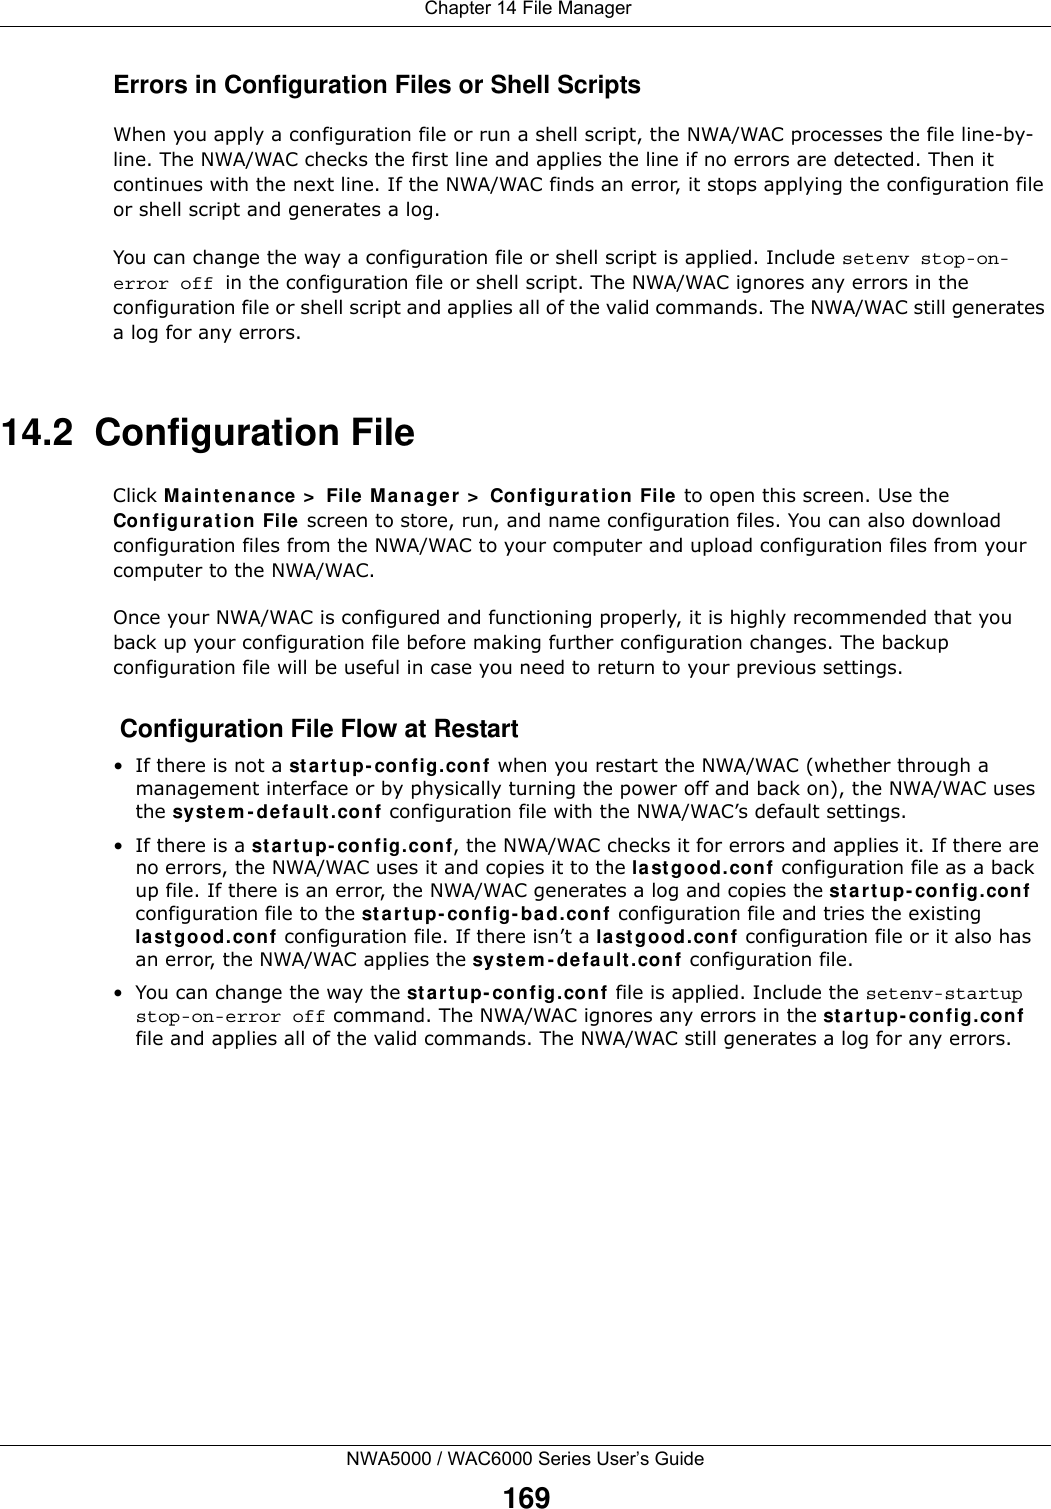  Chapter 14 File ManagerNWA5000 / WAC6000 Series User’s Guide169Errors in Configuration Files or Shell ScriptsWhen you apply a configuration file or run a shell script, the NWA/WAC processes the file line-by-line. The NWA/WAC checks the first line and applies the line if no errors are detected. Then it continues with the next line. If the NWA/WAC finds an error, it stops applying the configuration file or shell script and generates a log. You can change the way a configuration file or shell script is applied. Include setenv stop-on-error off in the configuration file or shell script. The NWA/WAC ignores any errors in the configuration file or shell script and applies all of the valid commands. The NWA/WAC still generates a log for any errors. 14.2  Configuration FileClick Maintenance &gt; File Manager &gt; Configuration File to open this screen. Use the Configuration File screen to store, run, and name configuration files. You can also download configuration files from the NWA/WAC to your computer and upload configuration files from your computer to the NWA/WAC.Once your NWA/WAC is configured and functioning properly, it is highly recommended that you back up your configuration file before making further configuration changes. The backup configuration file will be useful in case you need to return to your previous settings. Configuration File Flow at Restart• If there is not a startup-config.conf when you restart the NWA/WAC (whether through a management interface or by physically turning the power off and back on), the NWA/WAC uses the system-default.conf configuration file with the NWA/WAC’s default settings.•If there is a startup-config.conf, the NWA/WAC checks it for errors and applies it. If there are no errors, the NWA/WAC uses it and copies it to the lastgood.conf configuration file as a back up file. If there is an error, the NWA/WAC generates a log and copies the startup-config.conf configuration file to the startup-config-bad.conf configuration file and tries the existing lastgood.conf configuration file. If there isn’t a lastgood.conf configuration file or it also has an error, the NWA/WAC applies the system-default.conf configuration file.• You can change the way the startup-config.conf file is applied. Include the setenv-startup stop-on-error off command. The NWA/WAC ignores any errors in the startup-config.conf file and applies all of the valid commands. The NWA/WAC still generates a log for any errors. 